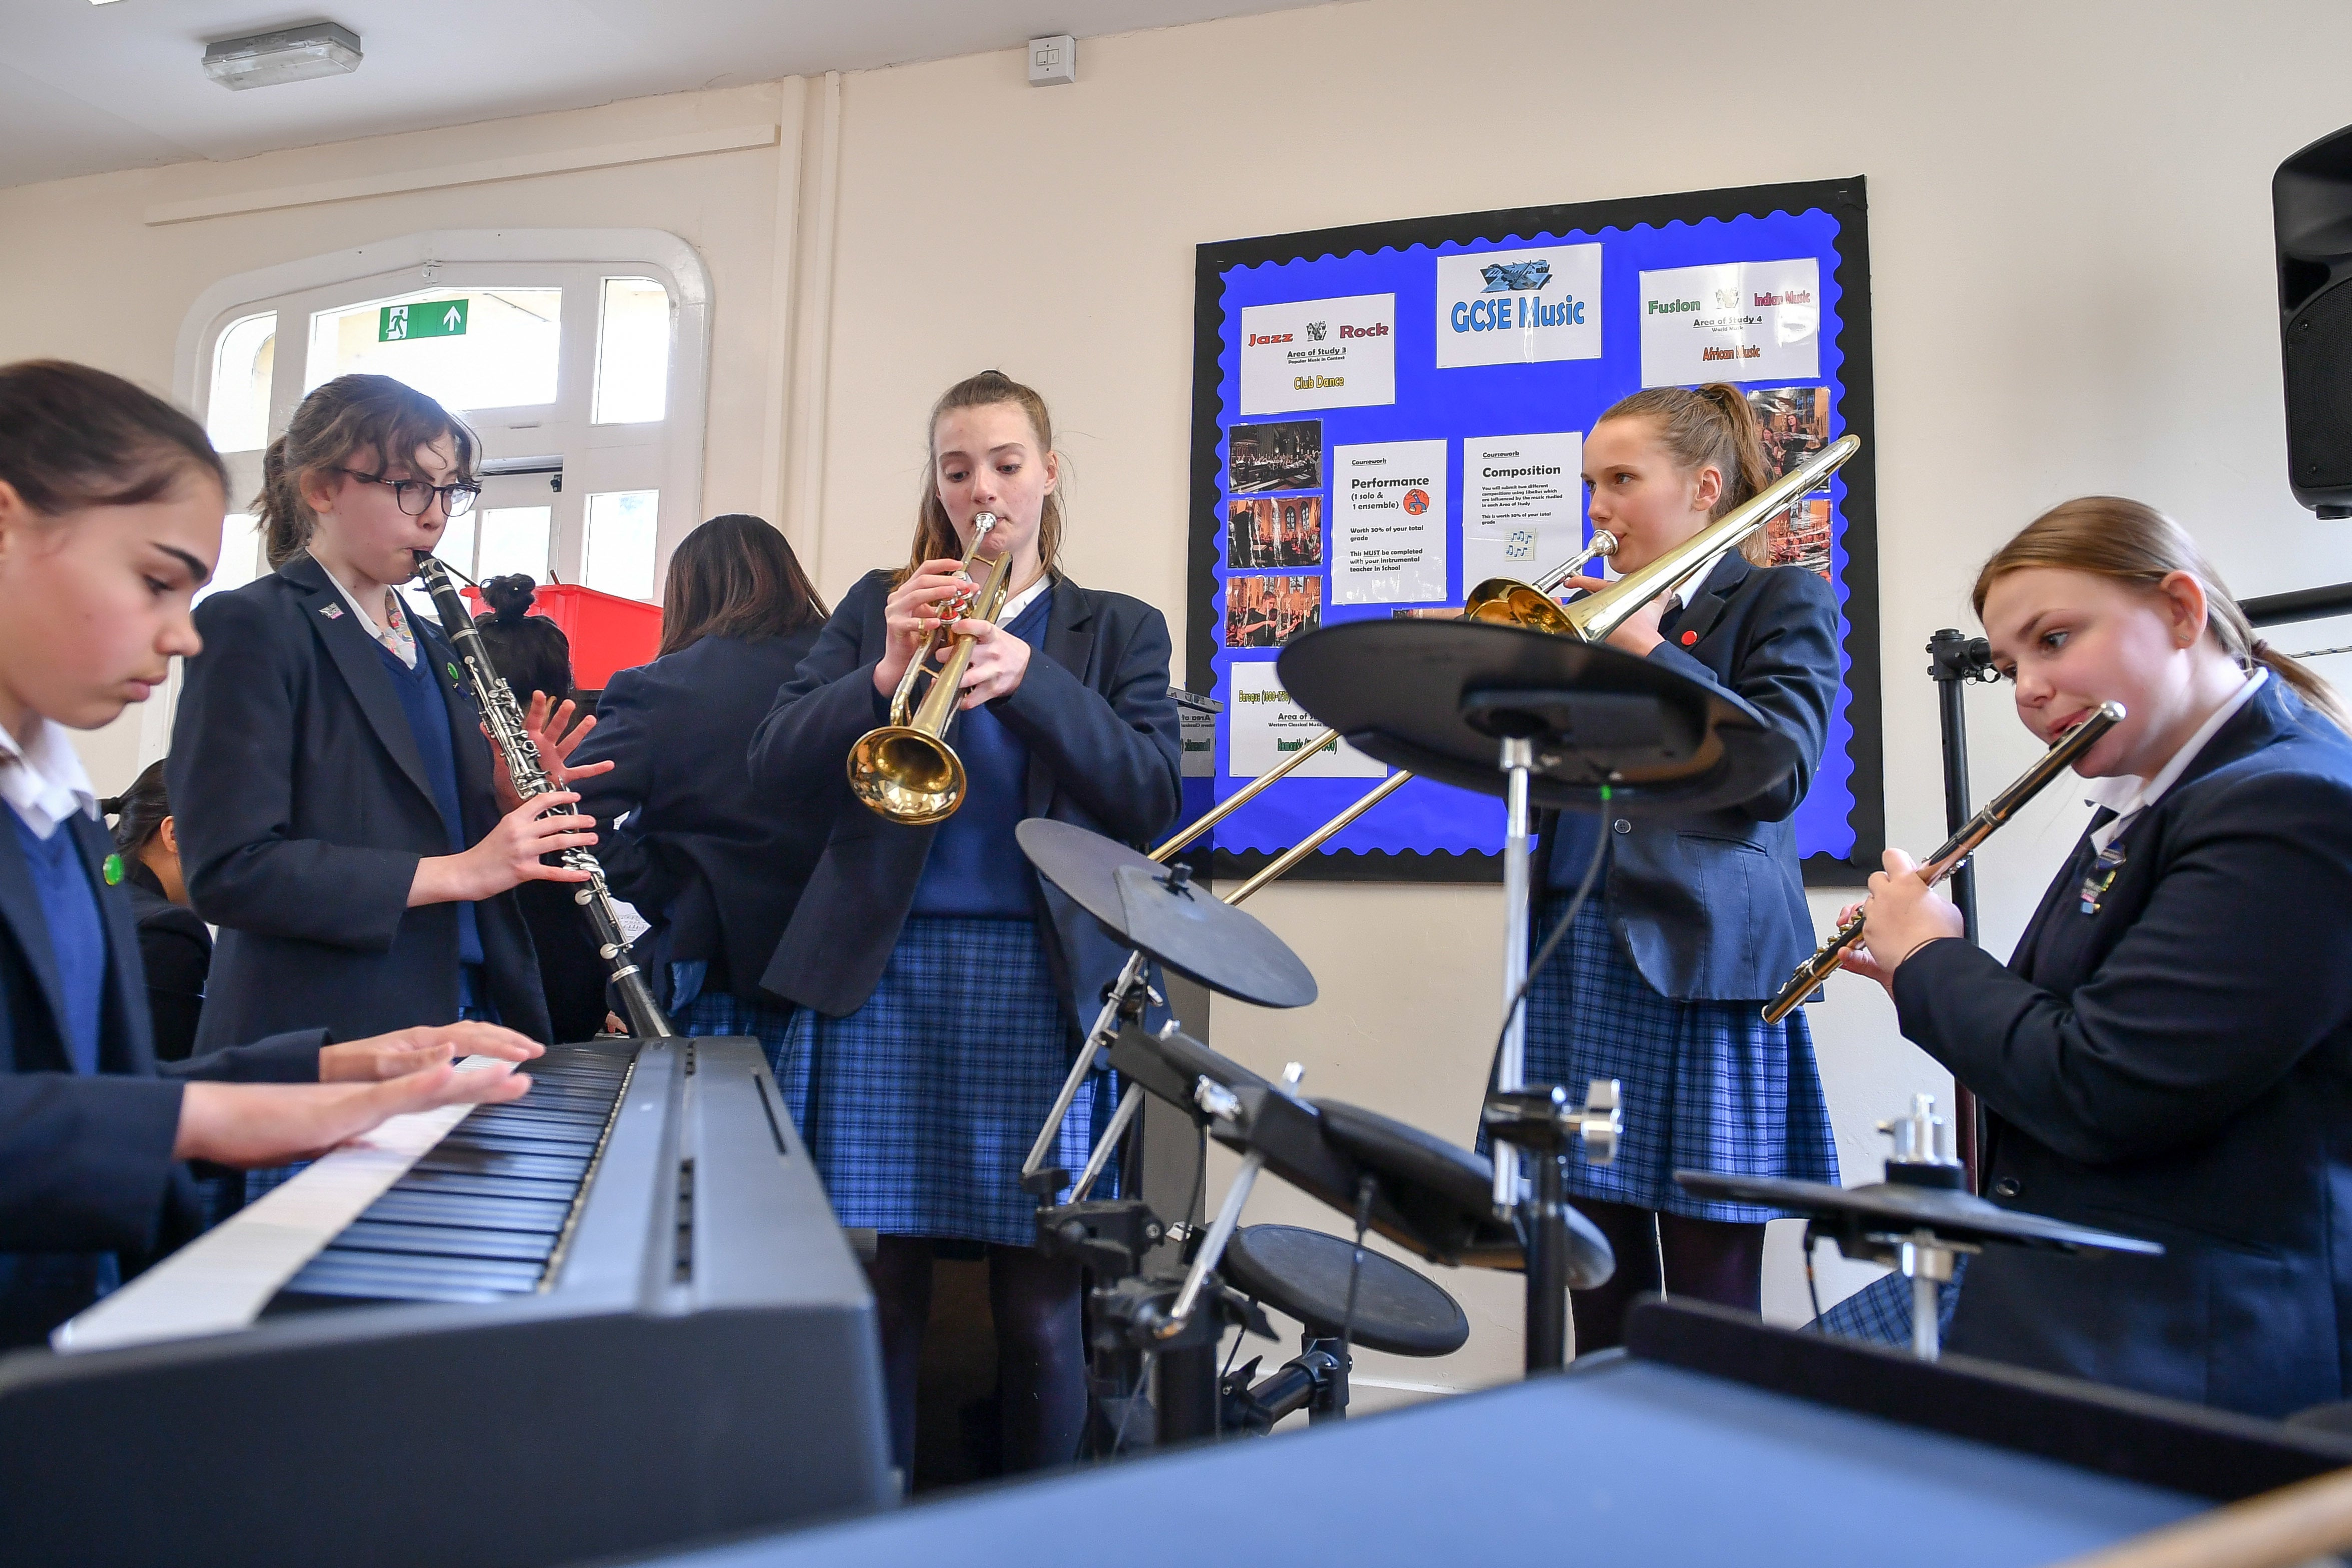 Some pupils are likely to drop out of private music lessons as parents juggle rising bills